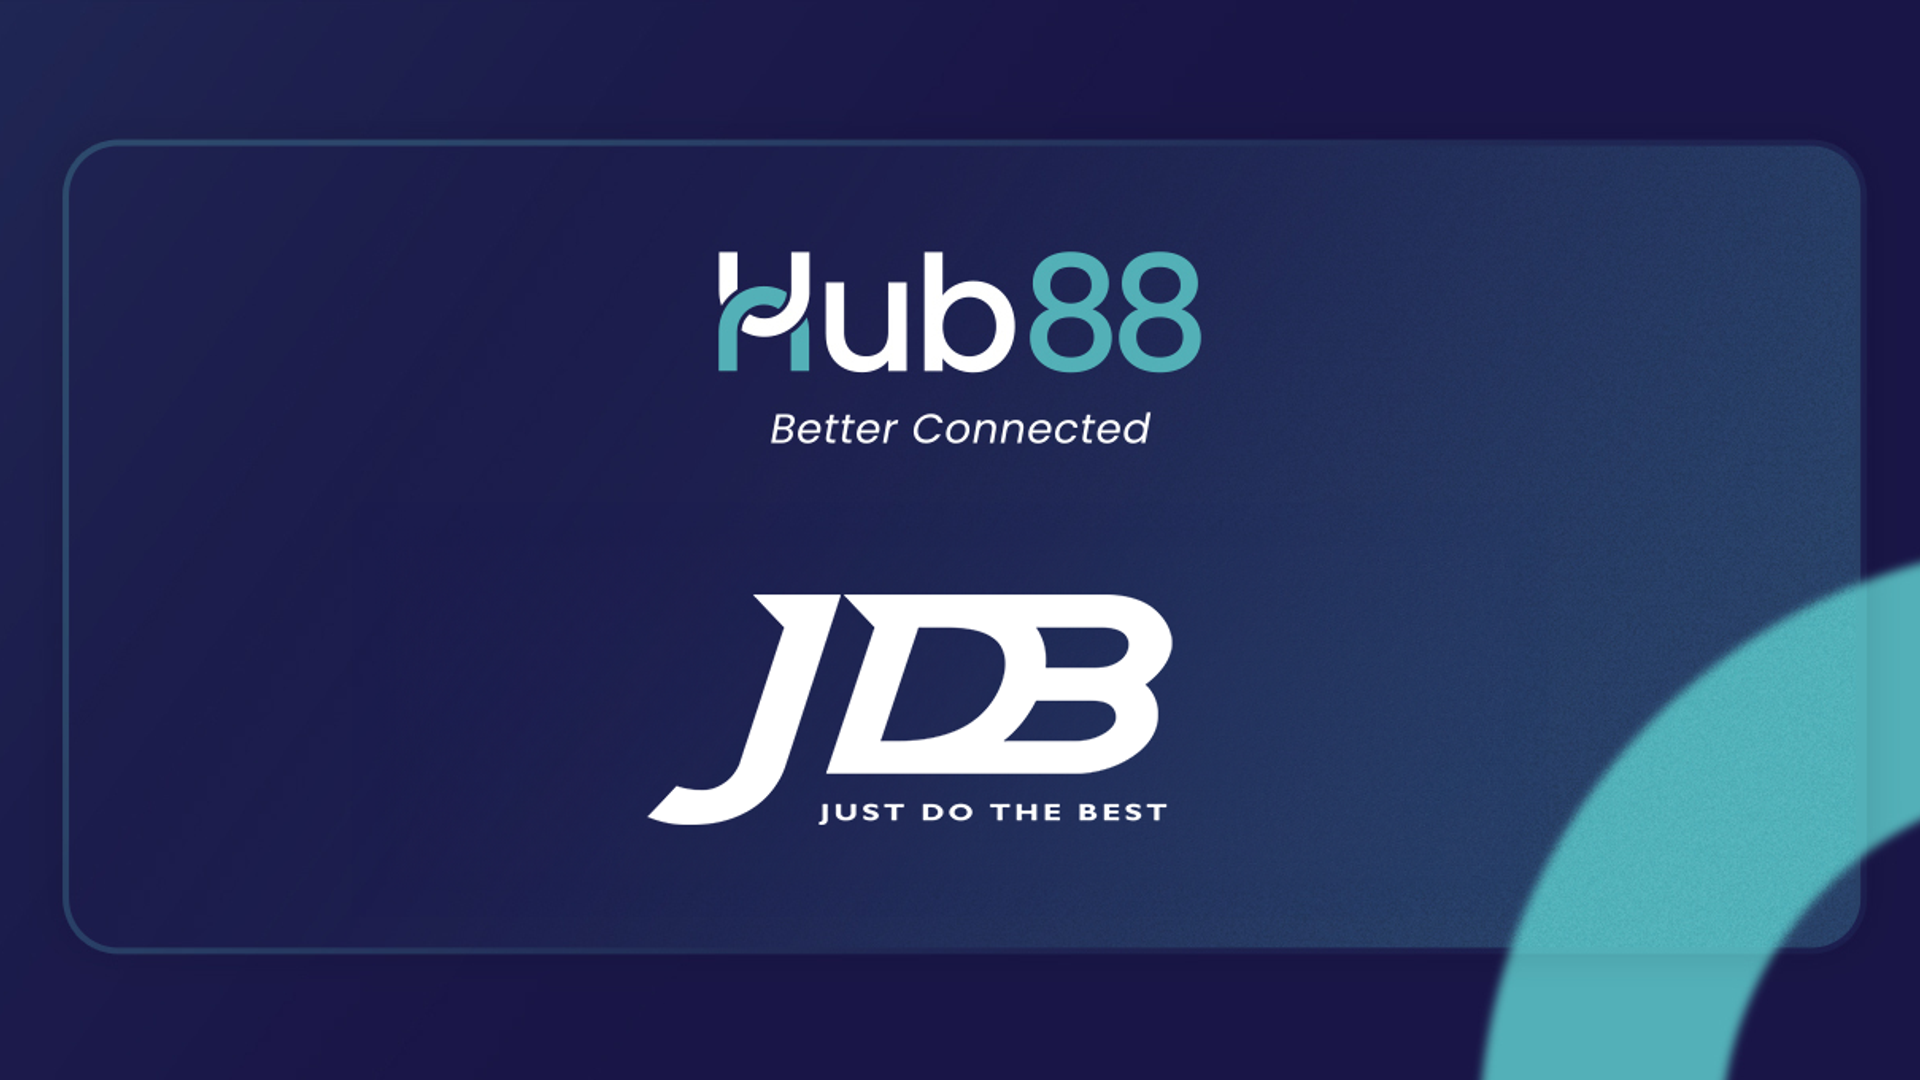 Cover Image for Hub88 rolls out unique content from JDB Gaming